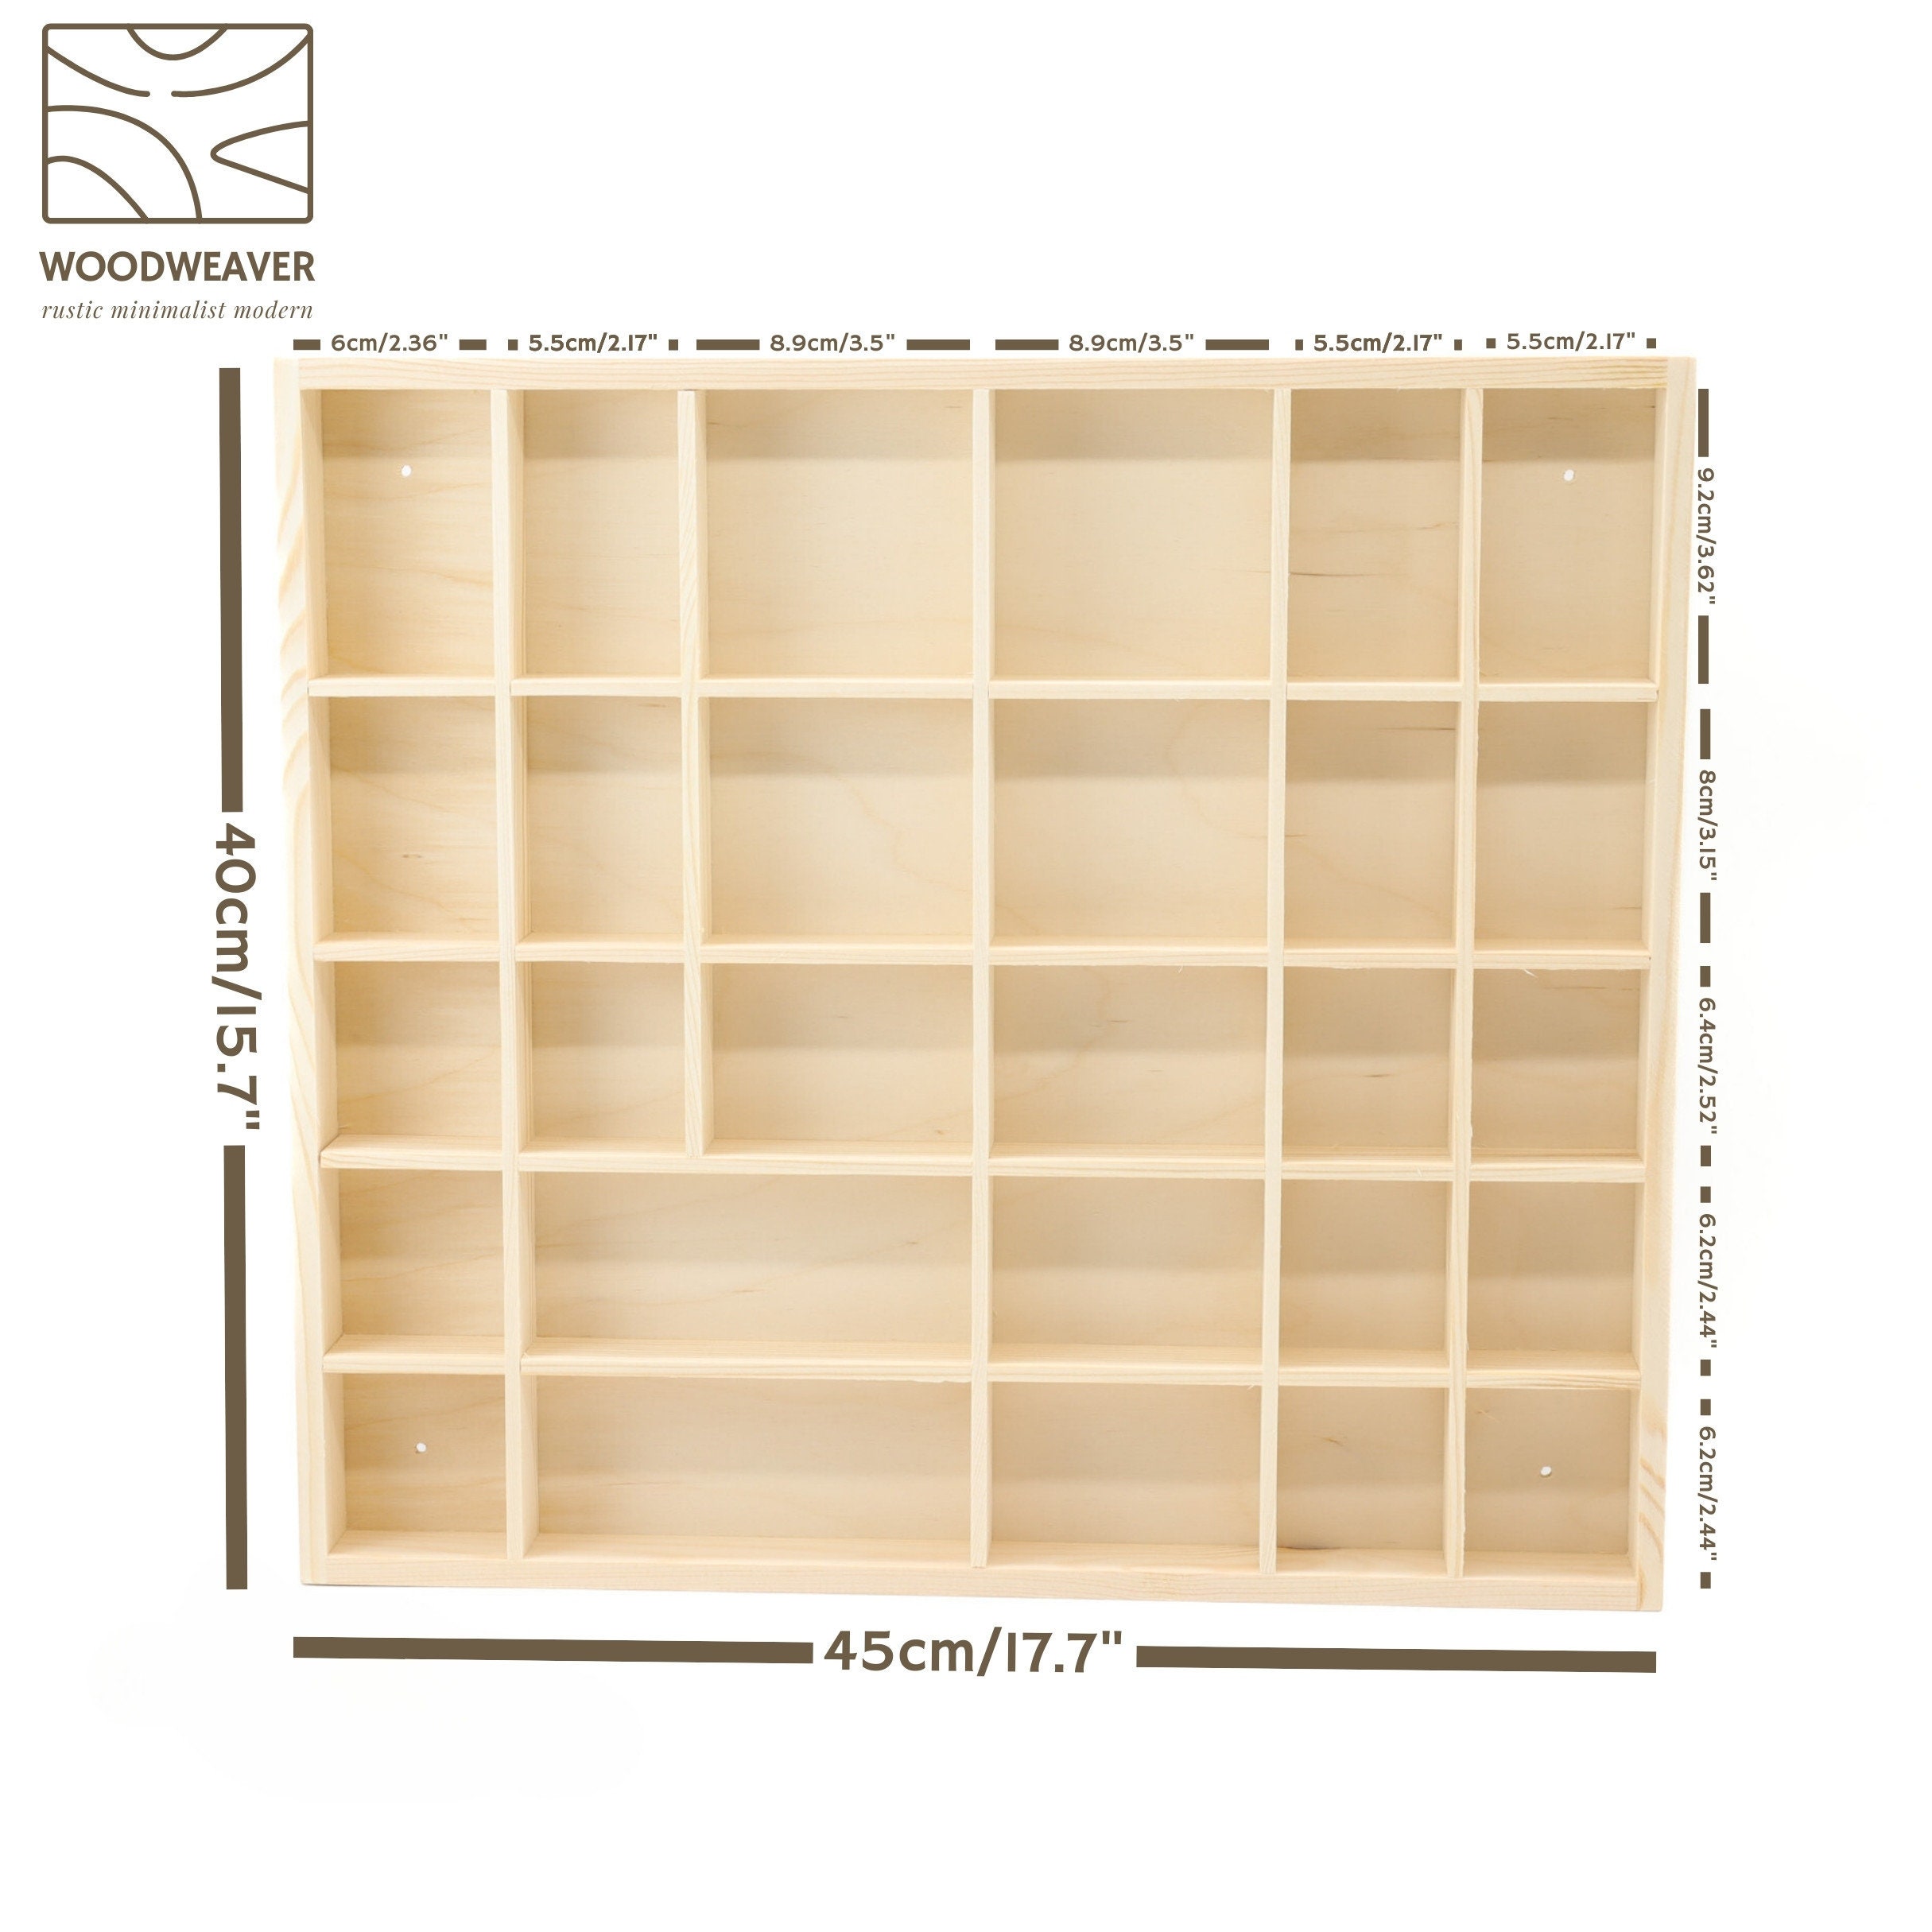 Shadow Box Unfinished Wooden Display With 28 Compartments